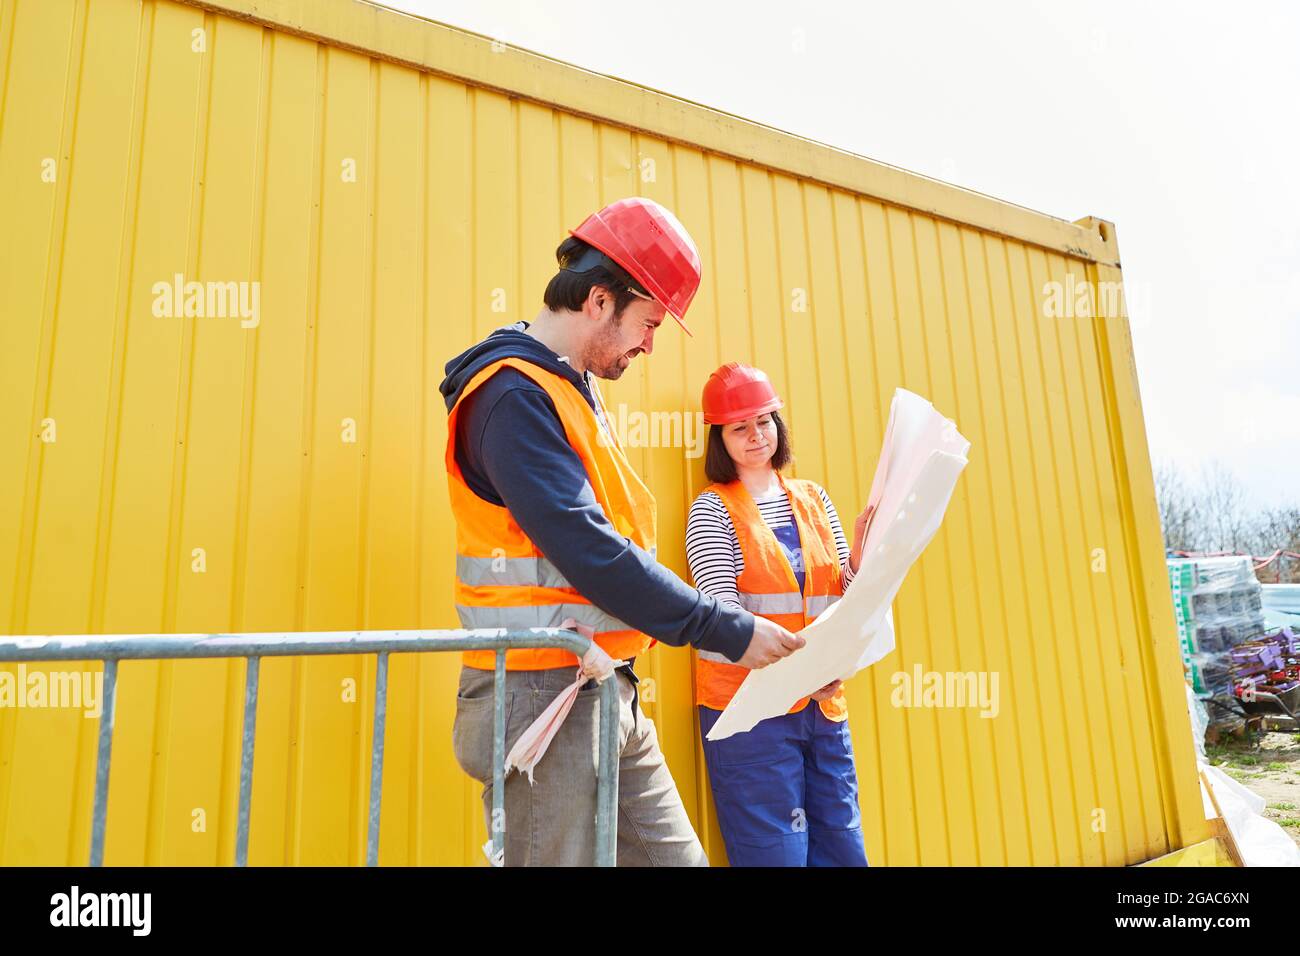 Craftsman and architect with blueprint in front of a yellow container during a construction project meeting Stock Photo